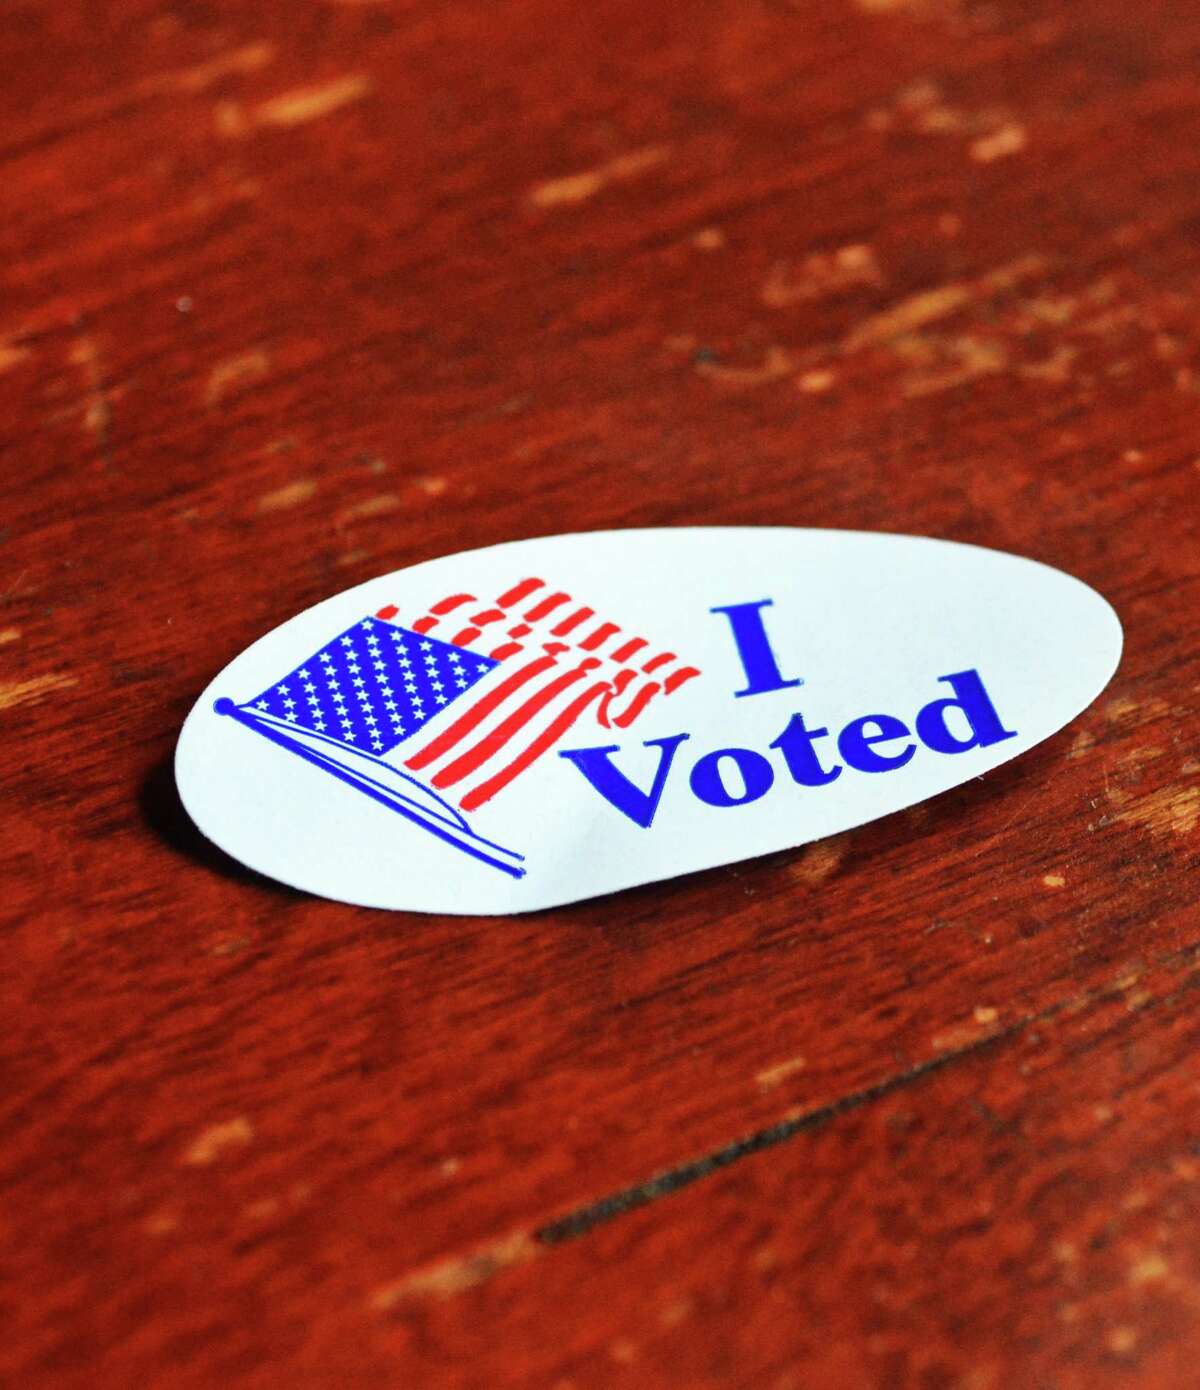 Voters who cast their ballots at the polling stations receive a special sticker.